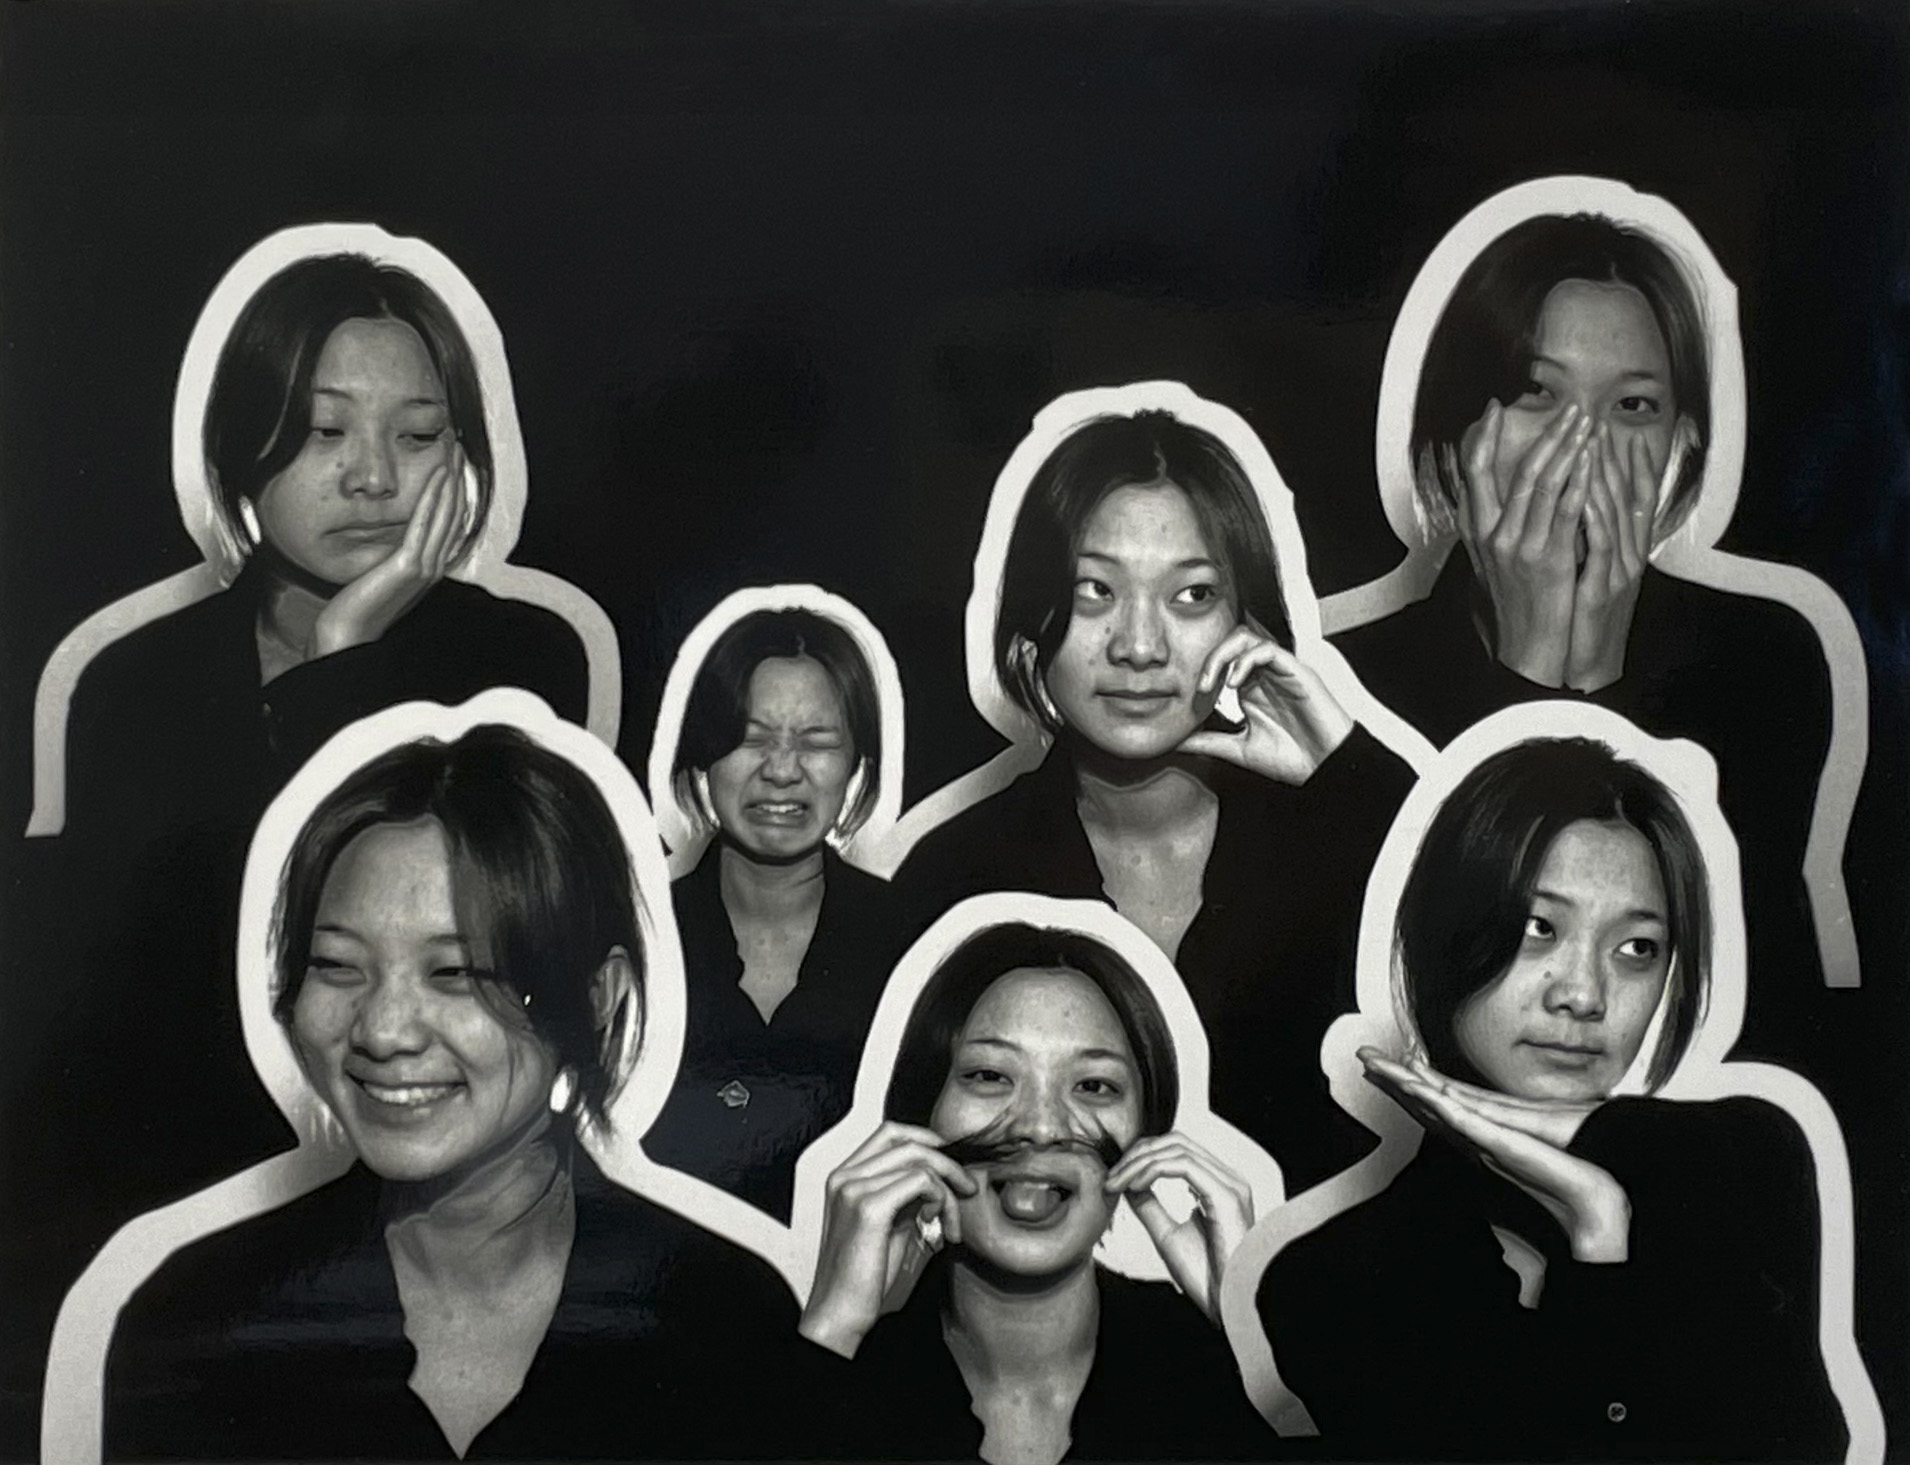 Multiple images of the same person making various facial expressions